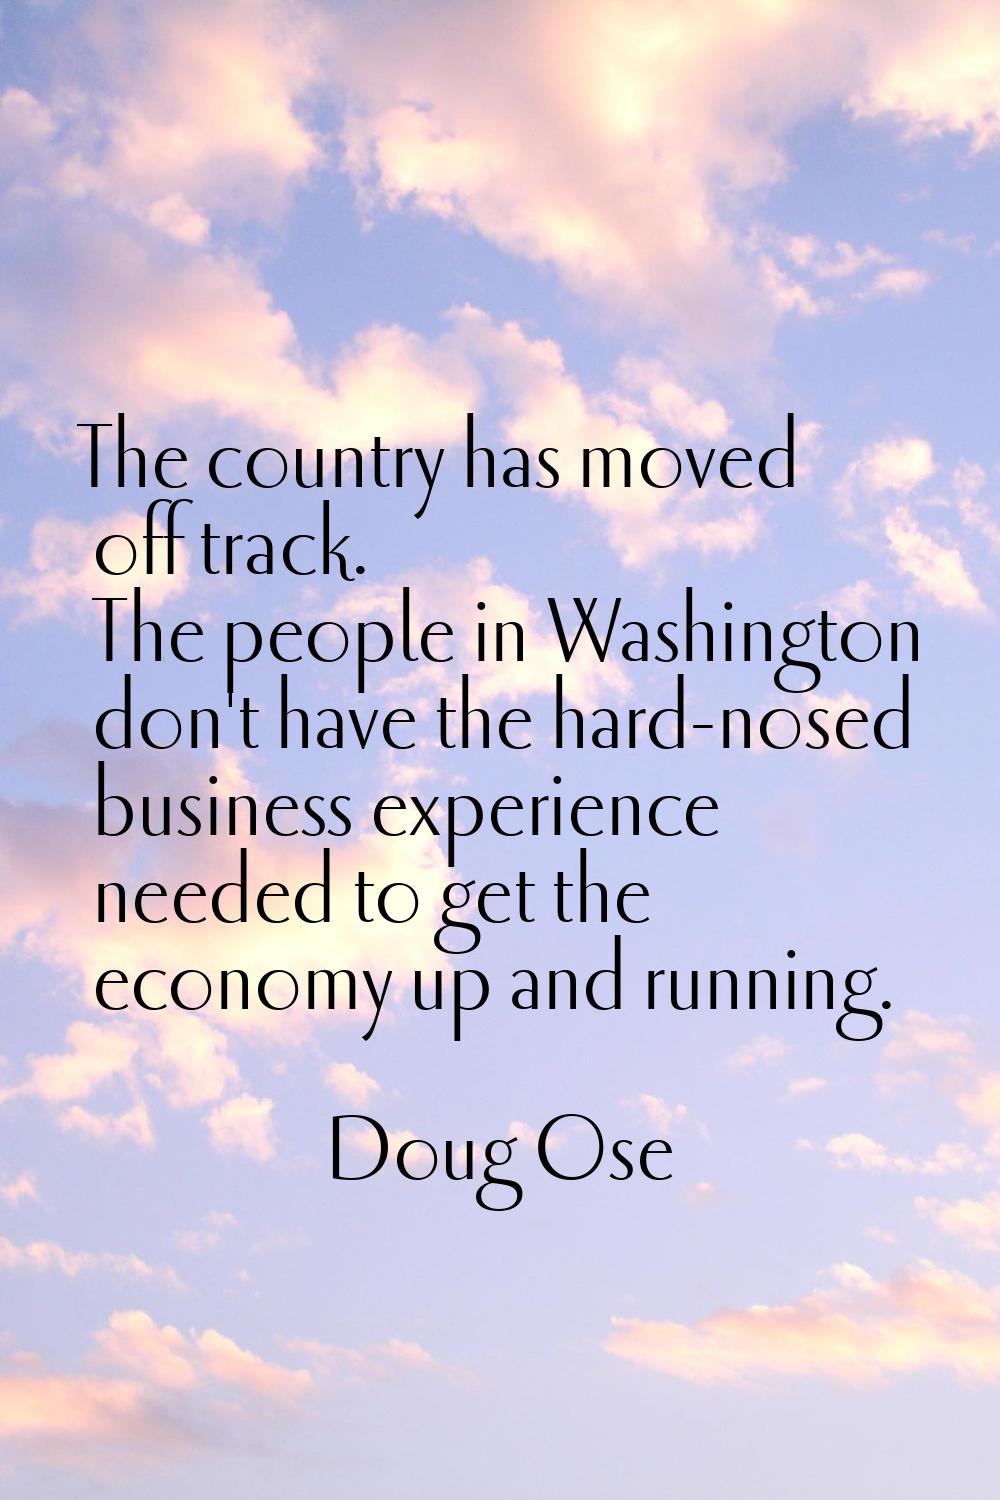 The country has moved off track. The people in Washington don't have the hard-nosed business experi